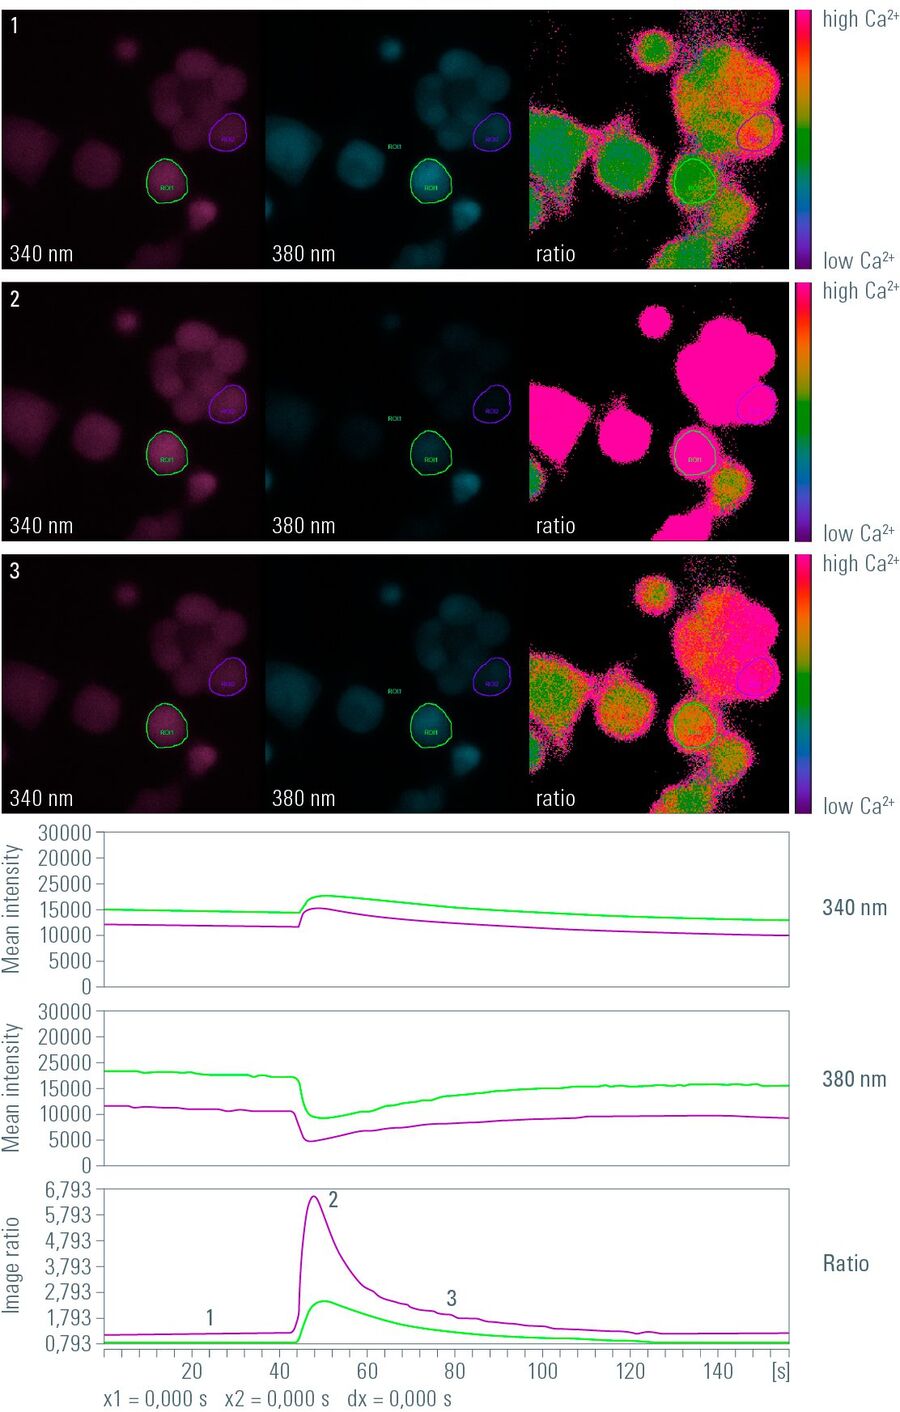 Snapshots from a time lapse of a calcium imaging experiment using the ratiometric calcium indicator Fura-2.